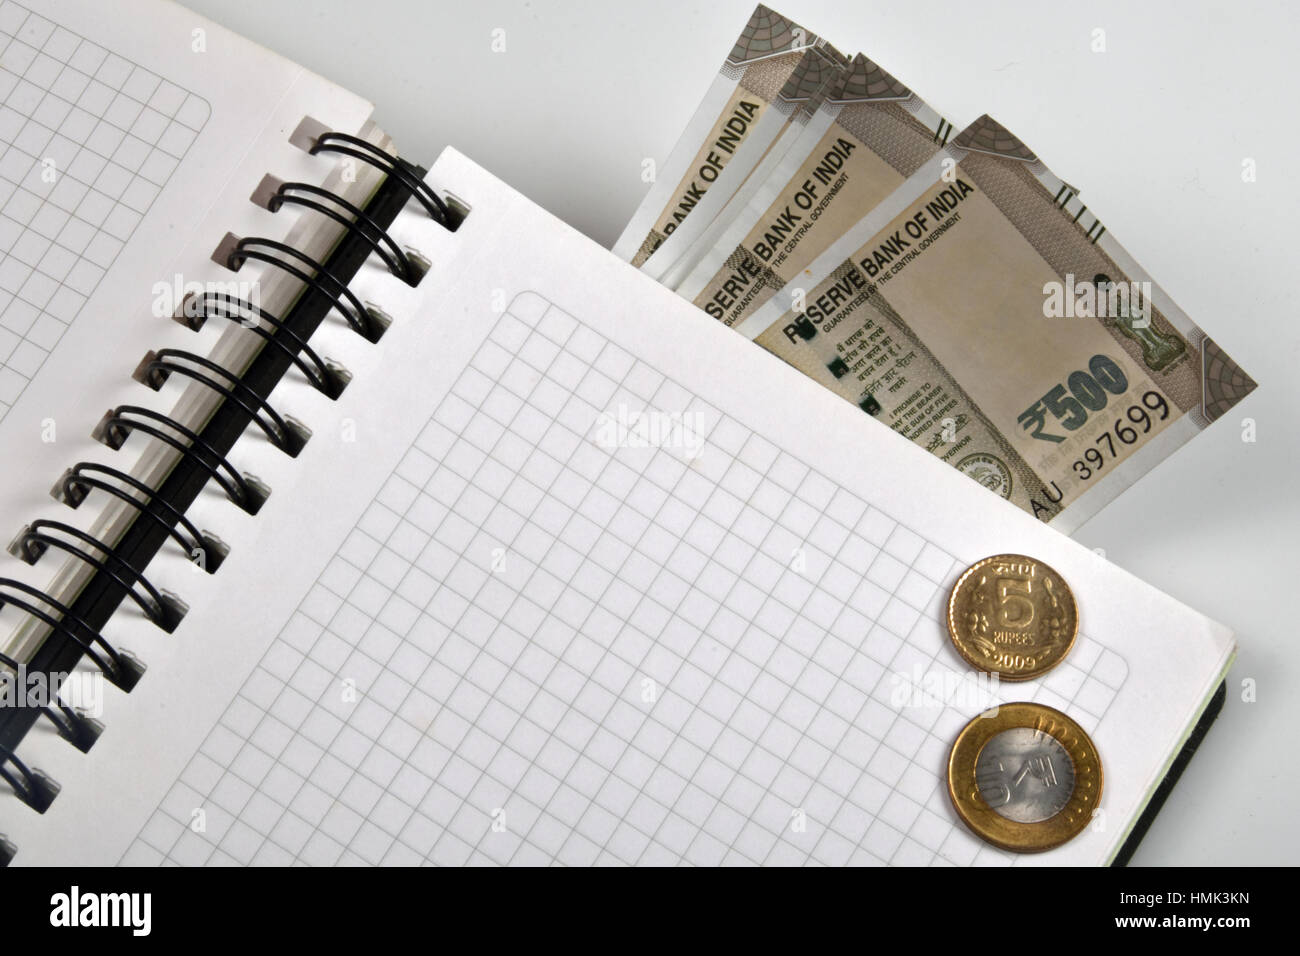 New Indian currency Stock Photo